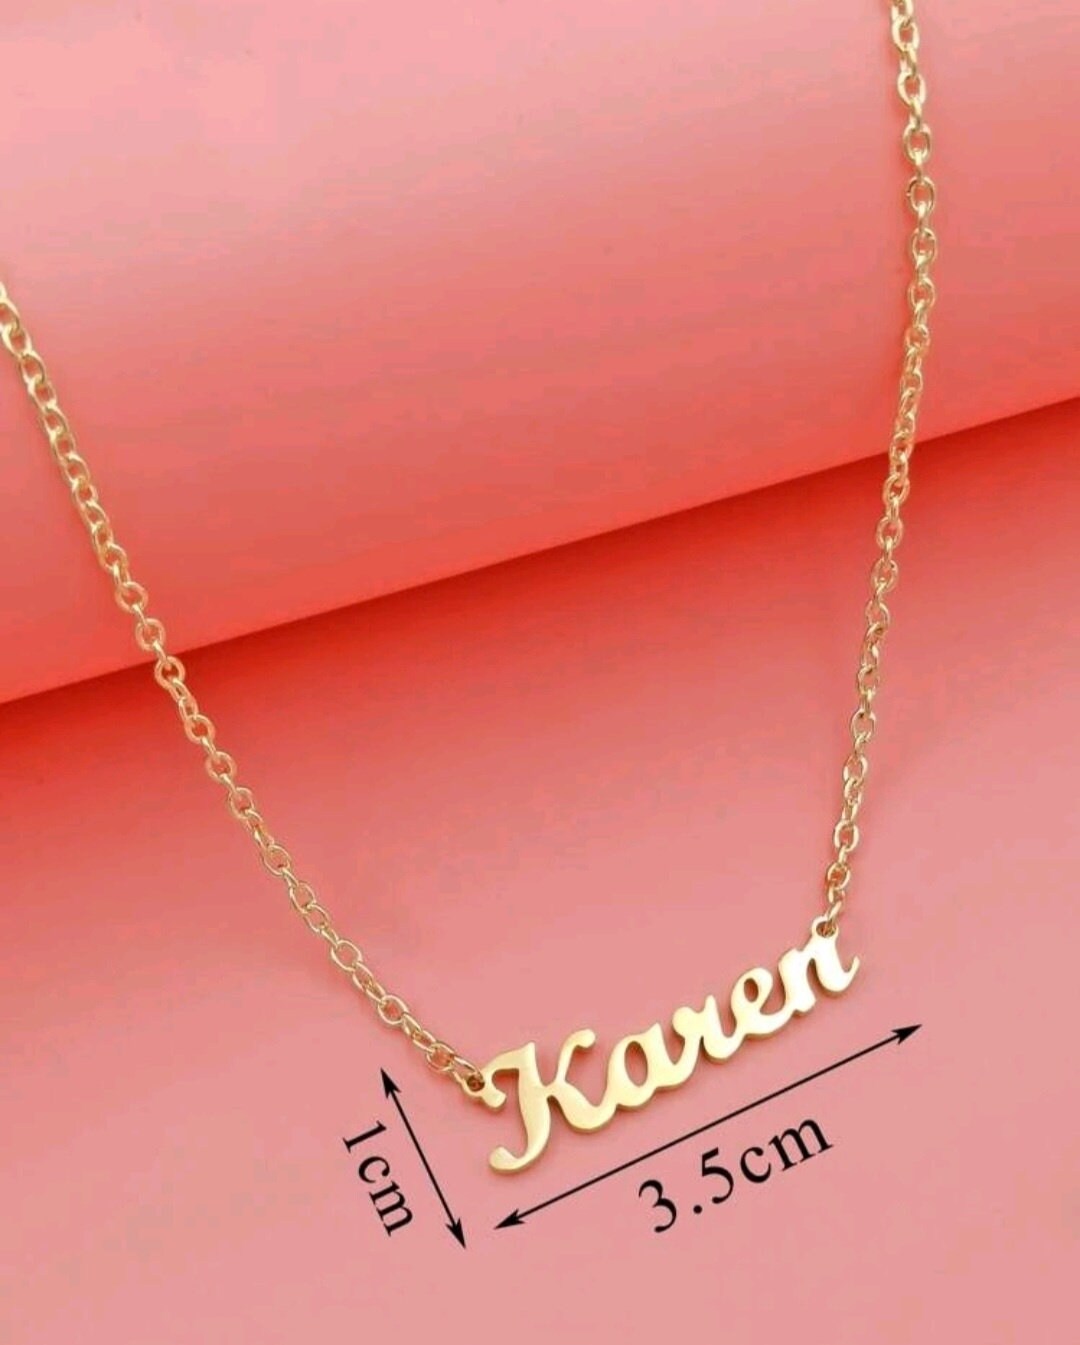 Dainty Name necklace Karen gold Stainless steel pendant necklace gift for her